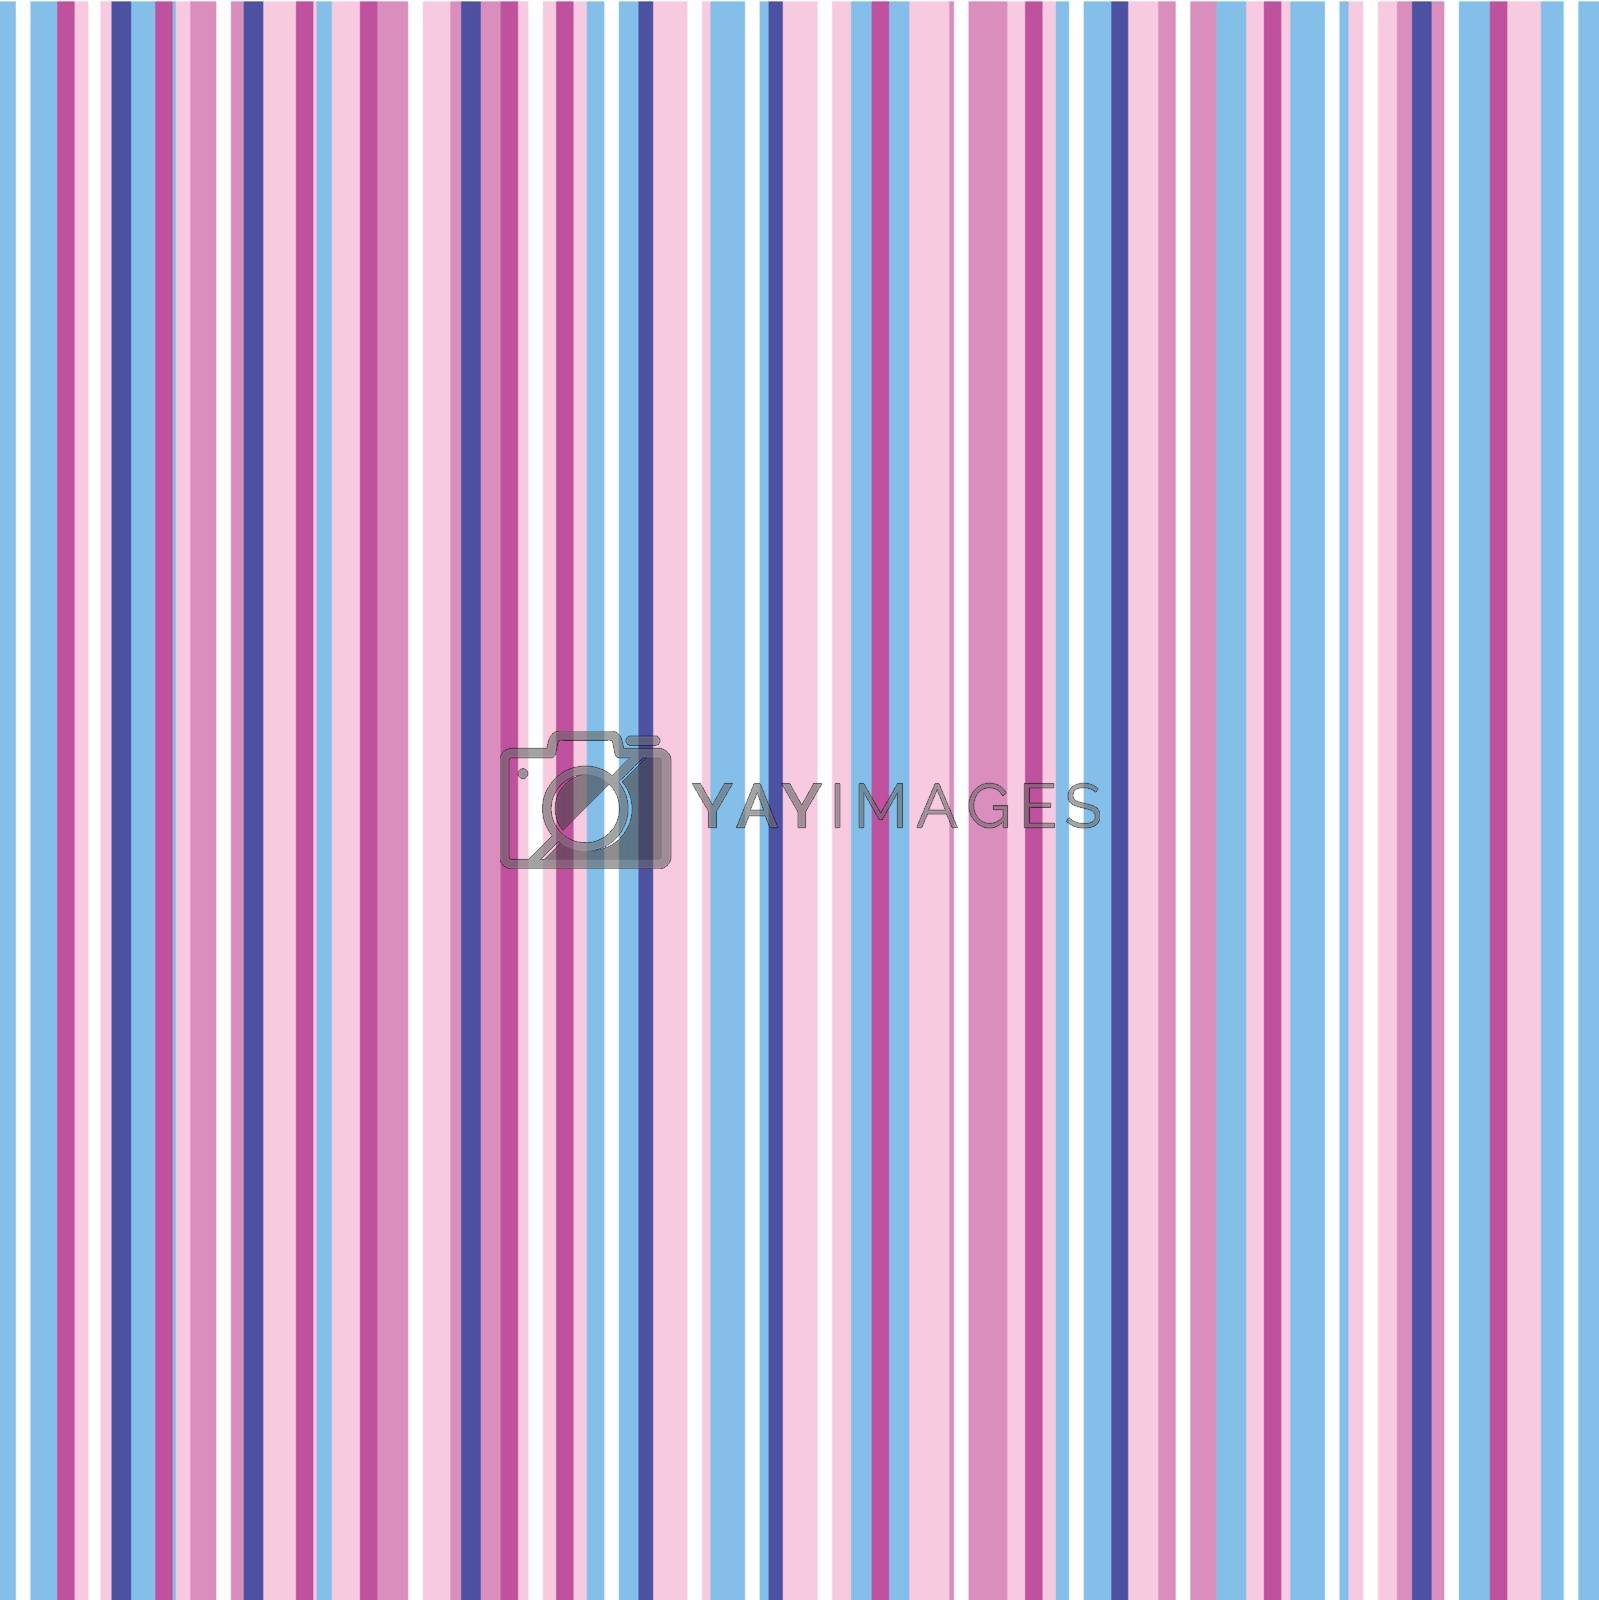 Royalty free image of Striped background by xakkis